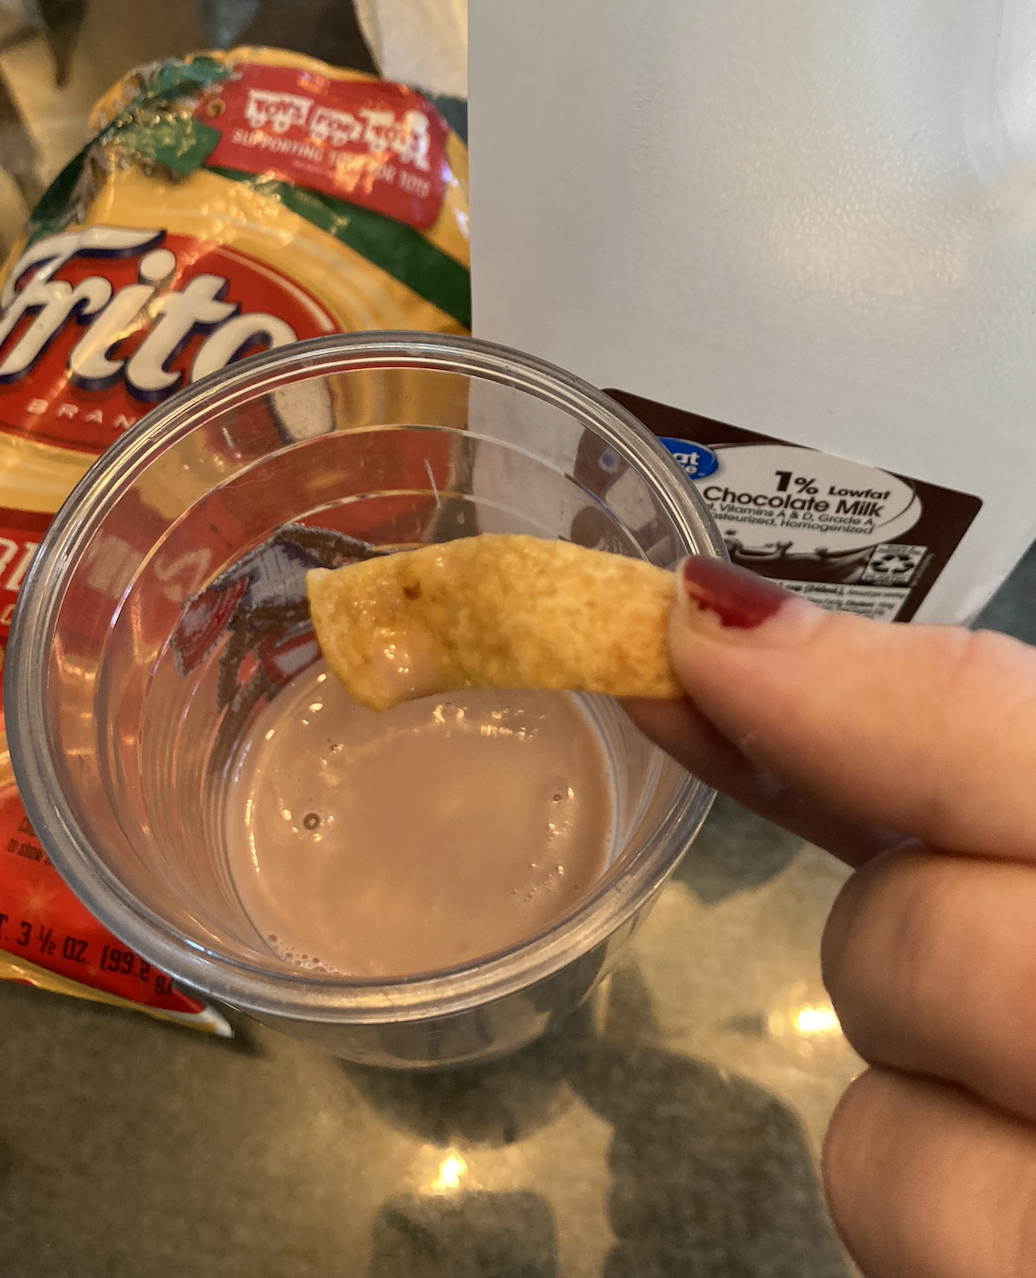 fritos being dipped in a glass of chocolate milk